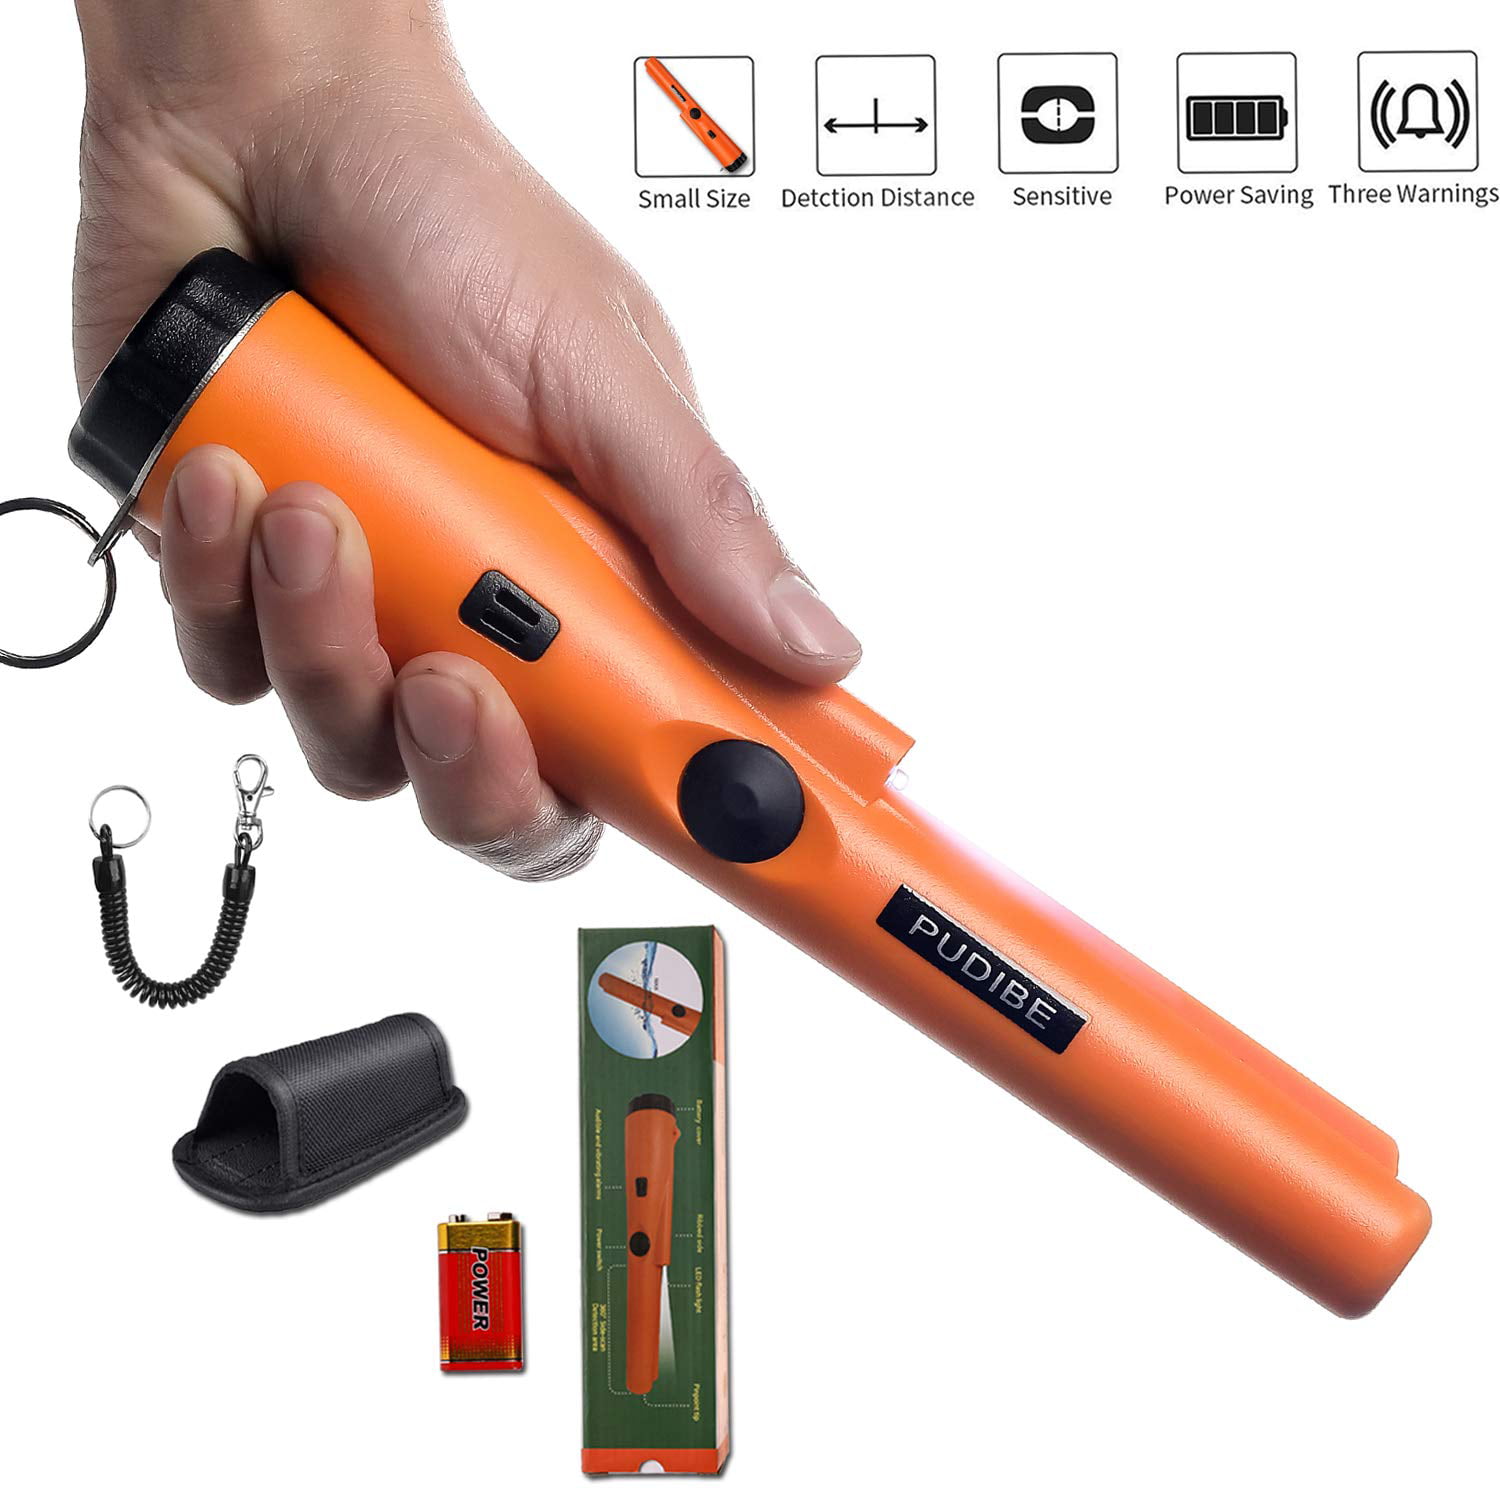 Details about  / Waterproof Detector Pinpointer Metal Detector Pinpointer Pointer Probe Sensitive